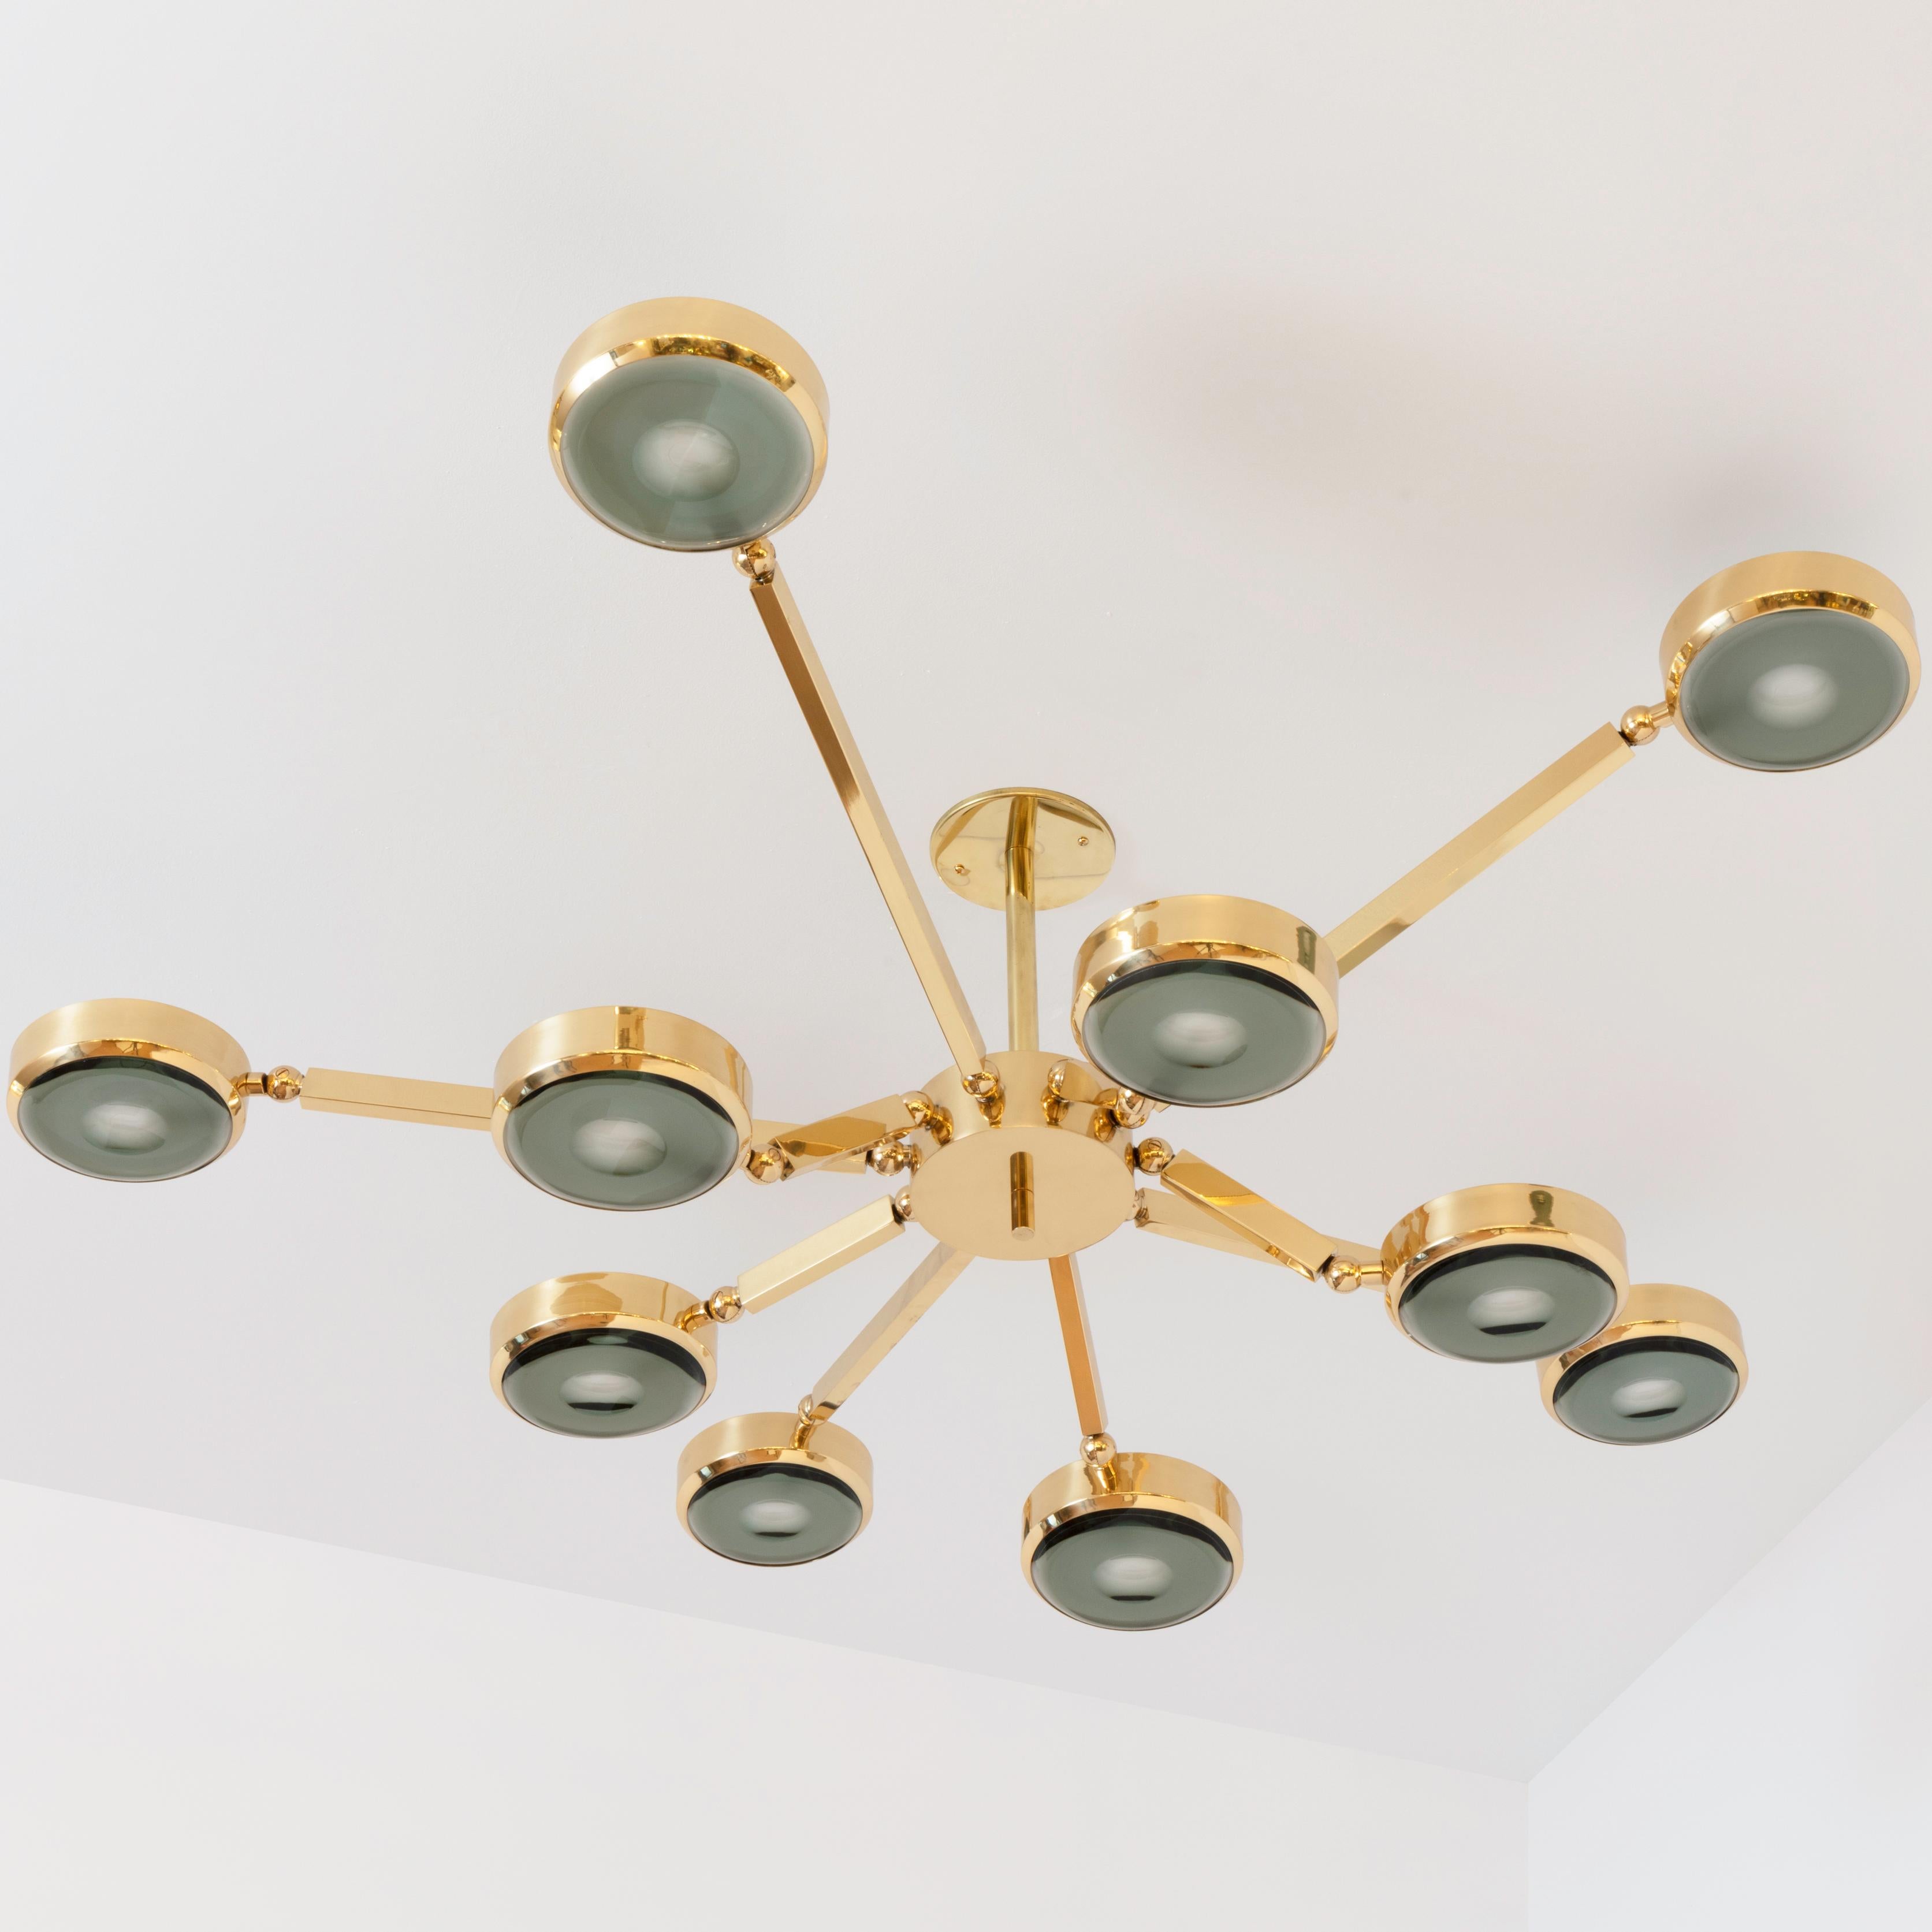 Italian Oculus Articulating Ceiling Light-Bronze Finish and Carved Glass For Sale